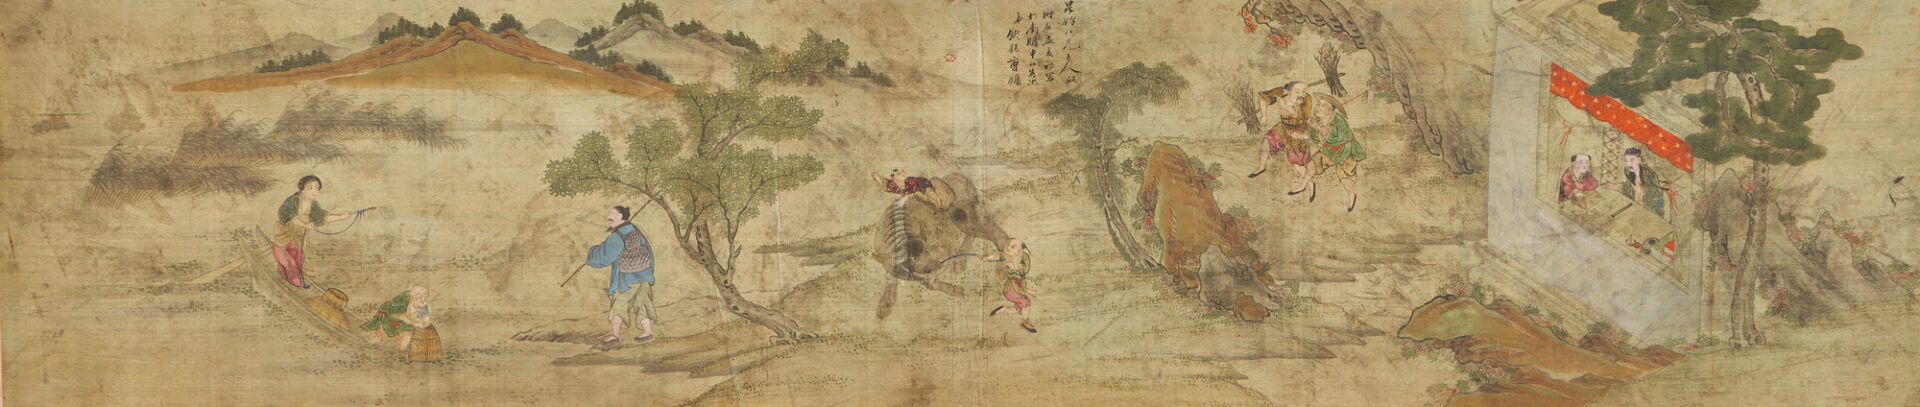 Lot 30: Large Qing Panoramic Chinese Scroll Painting